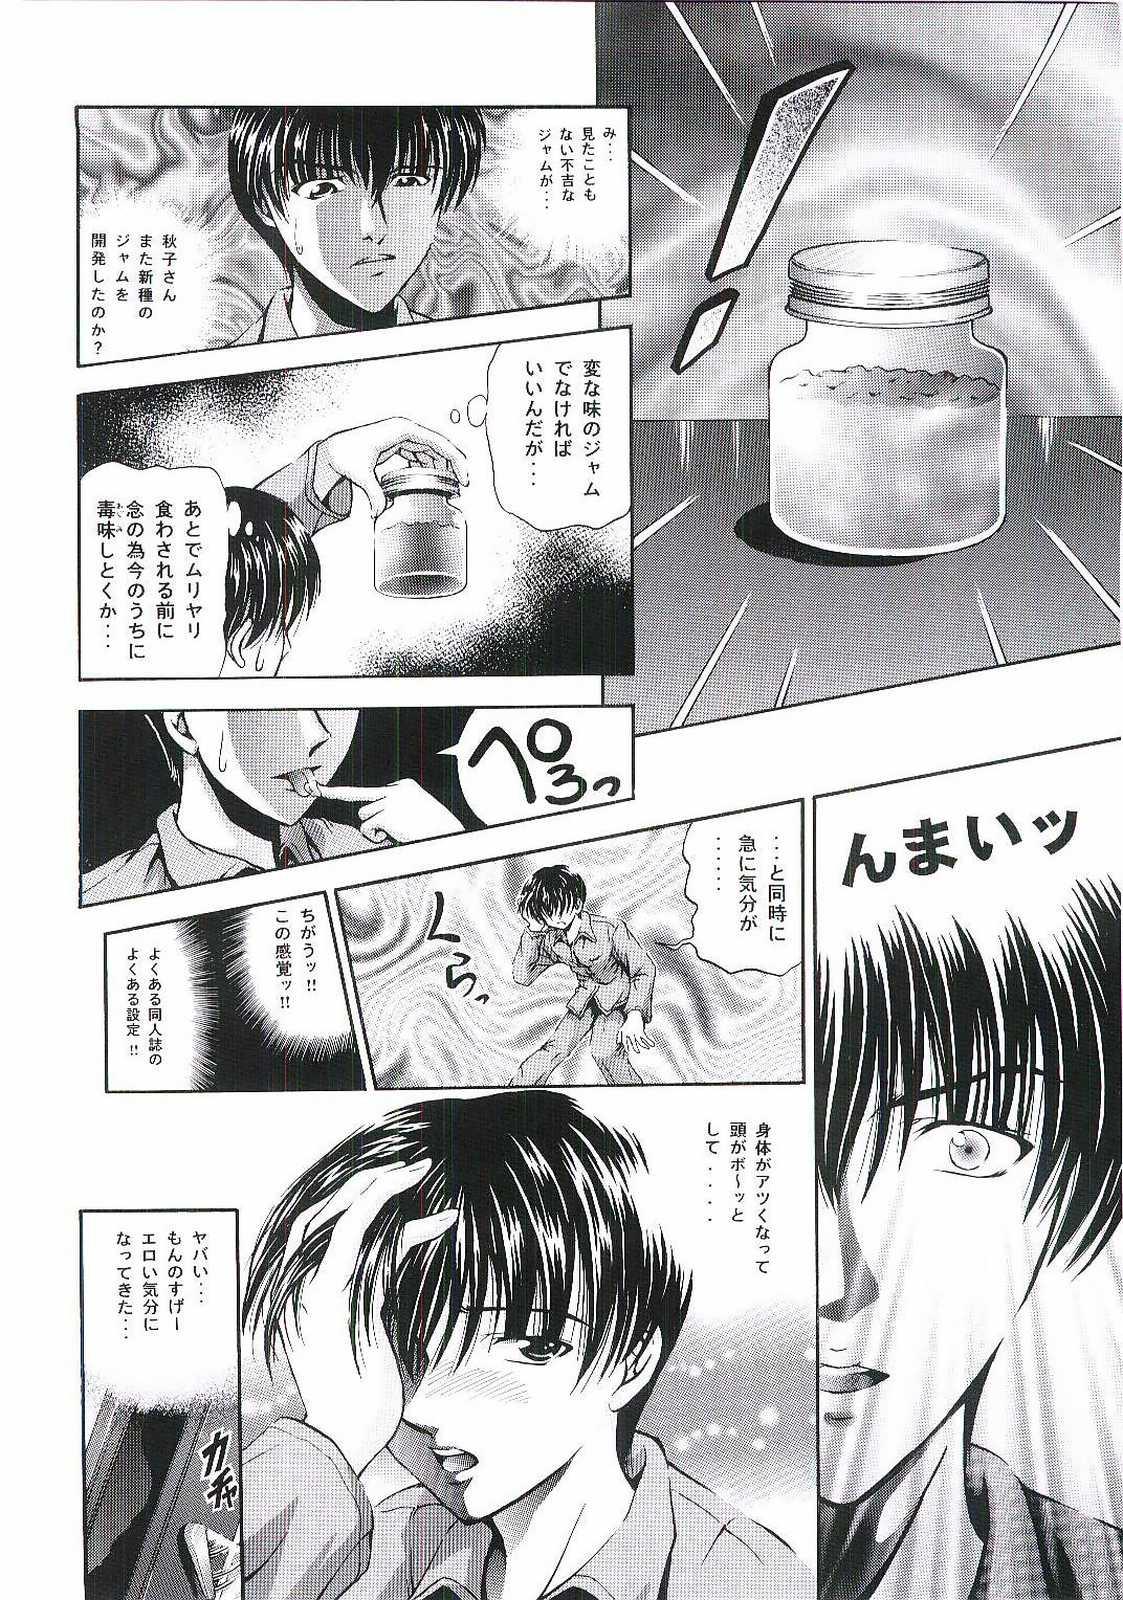 Ball Licking Six Piece 1 - Kanon Russia - Page 5